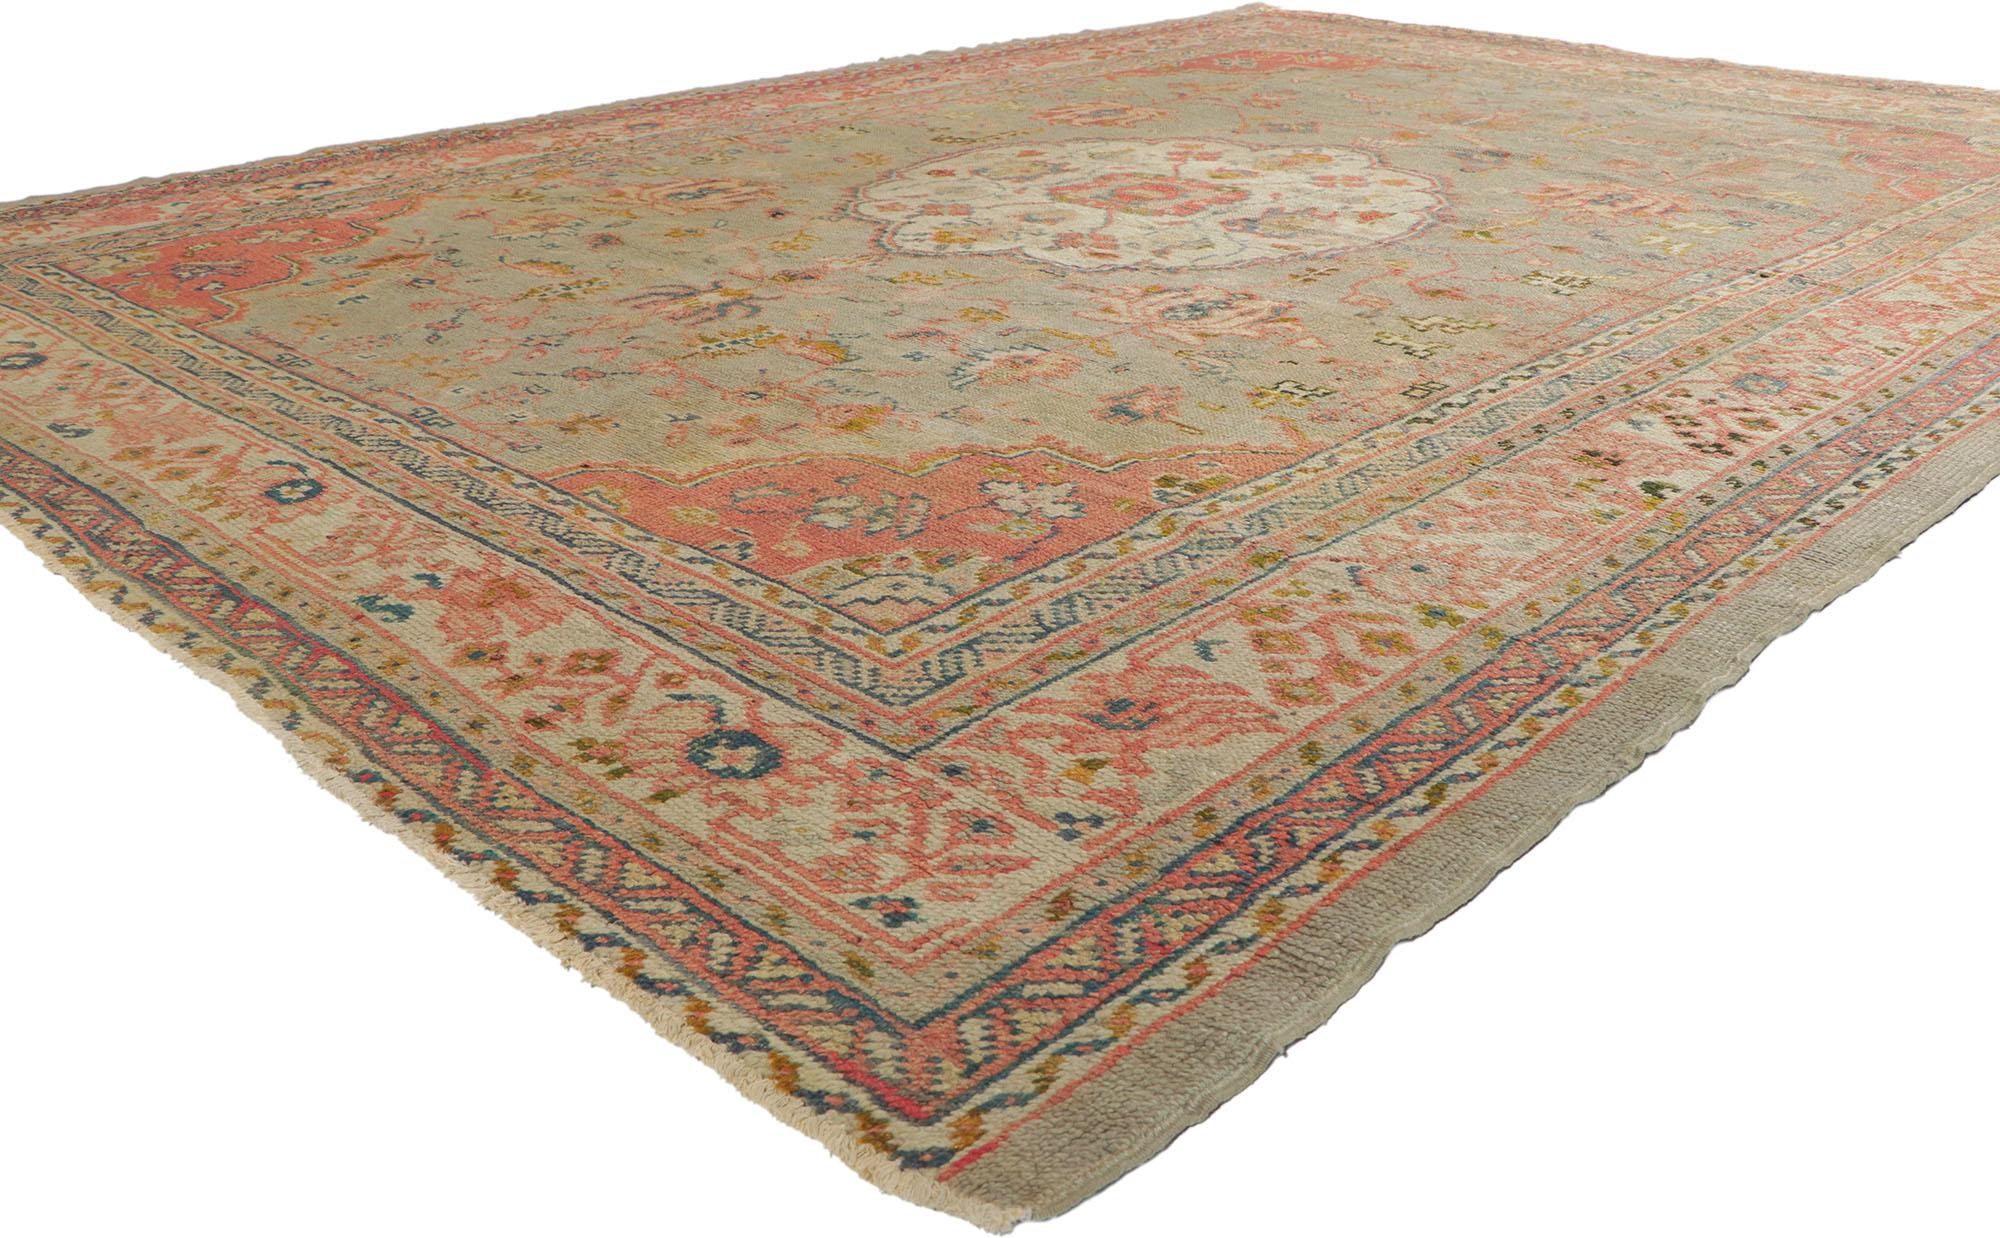 72327 Antique Turkish Oushak Rug, 08'01 X 11'00. Behold, a masterpiece of opulence and timeless allure! This meticulously hand-knotted wool antique Turkish Oushak rug, unfolds its regal charm in the Bridgerton style while embracing the essence of